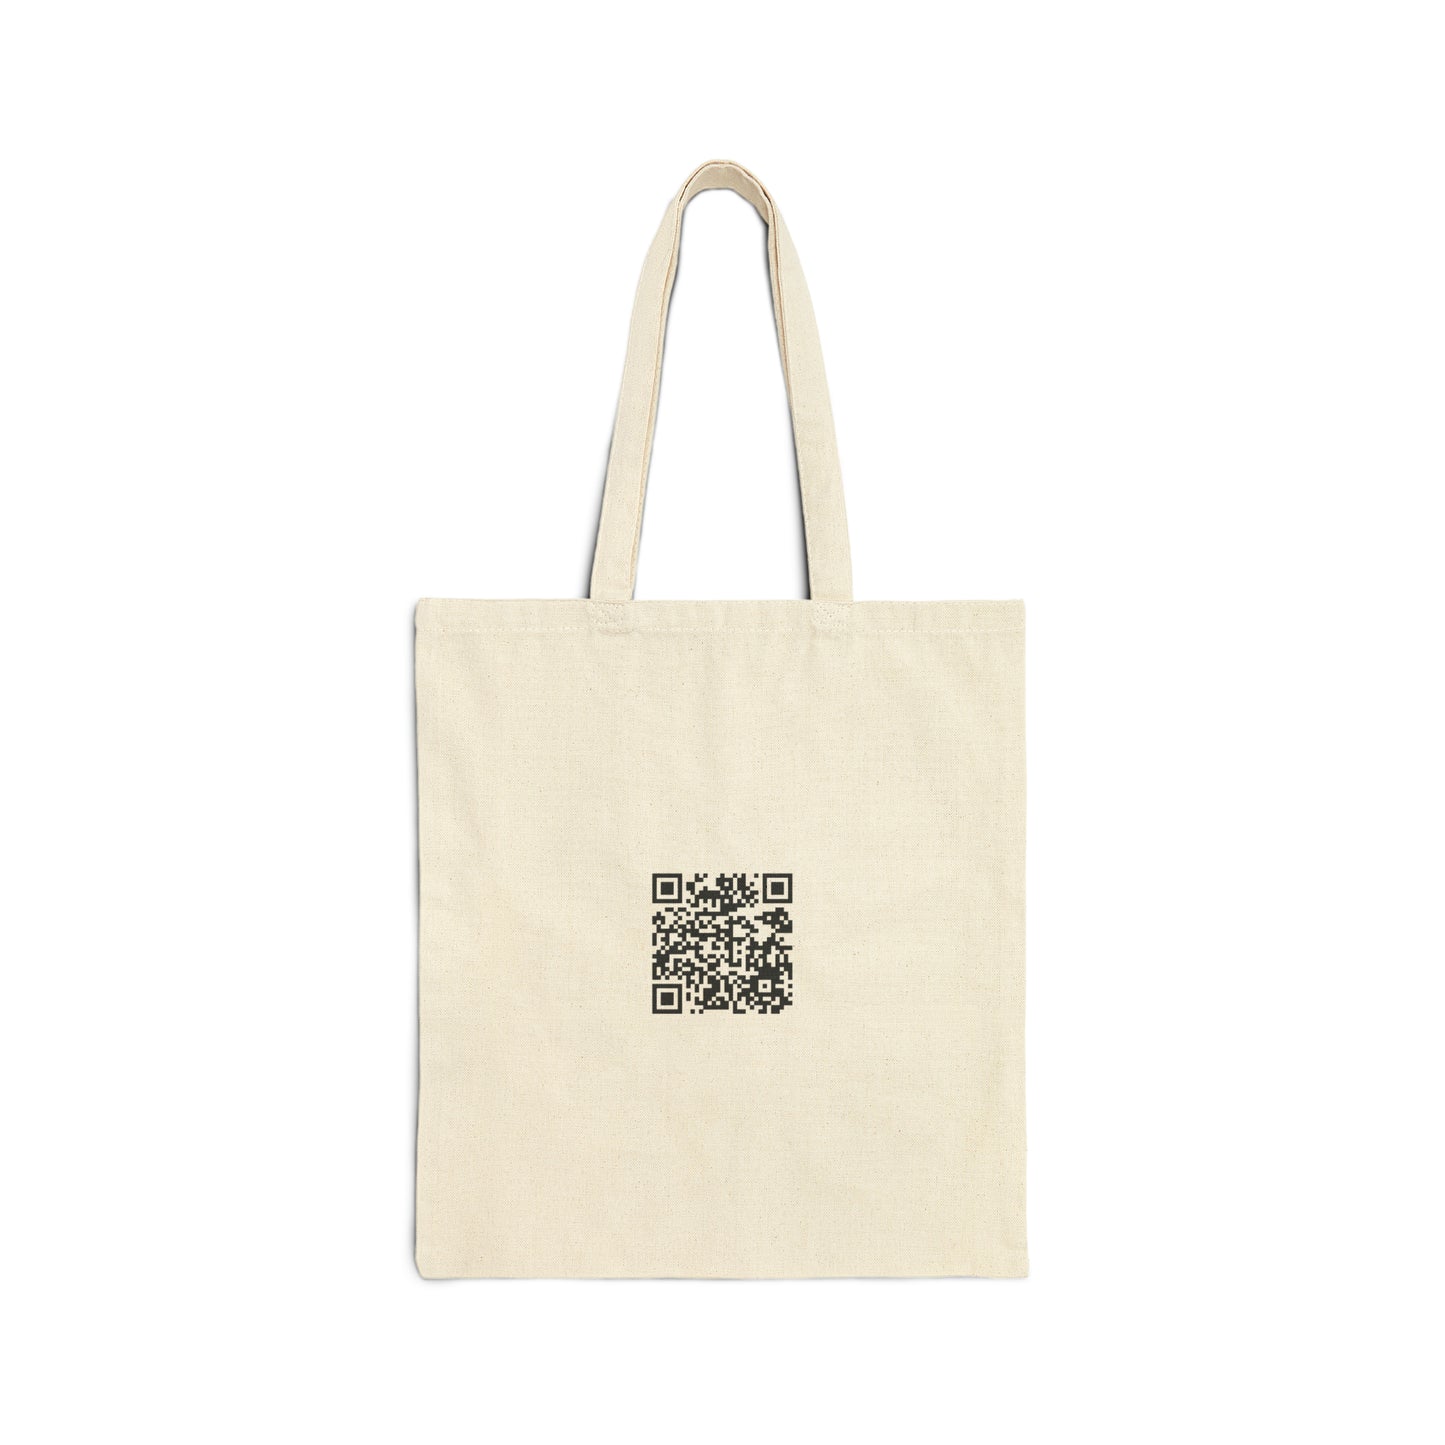 The Firing Line - Cotton Canvas Tote Bag